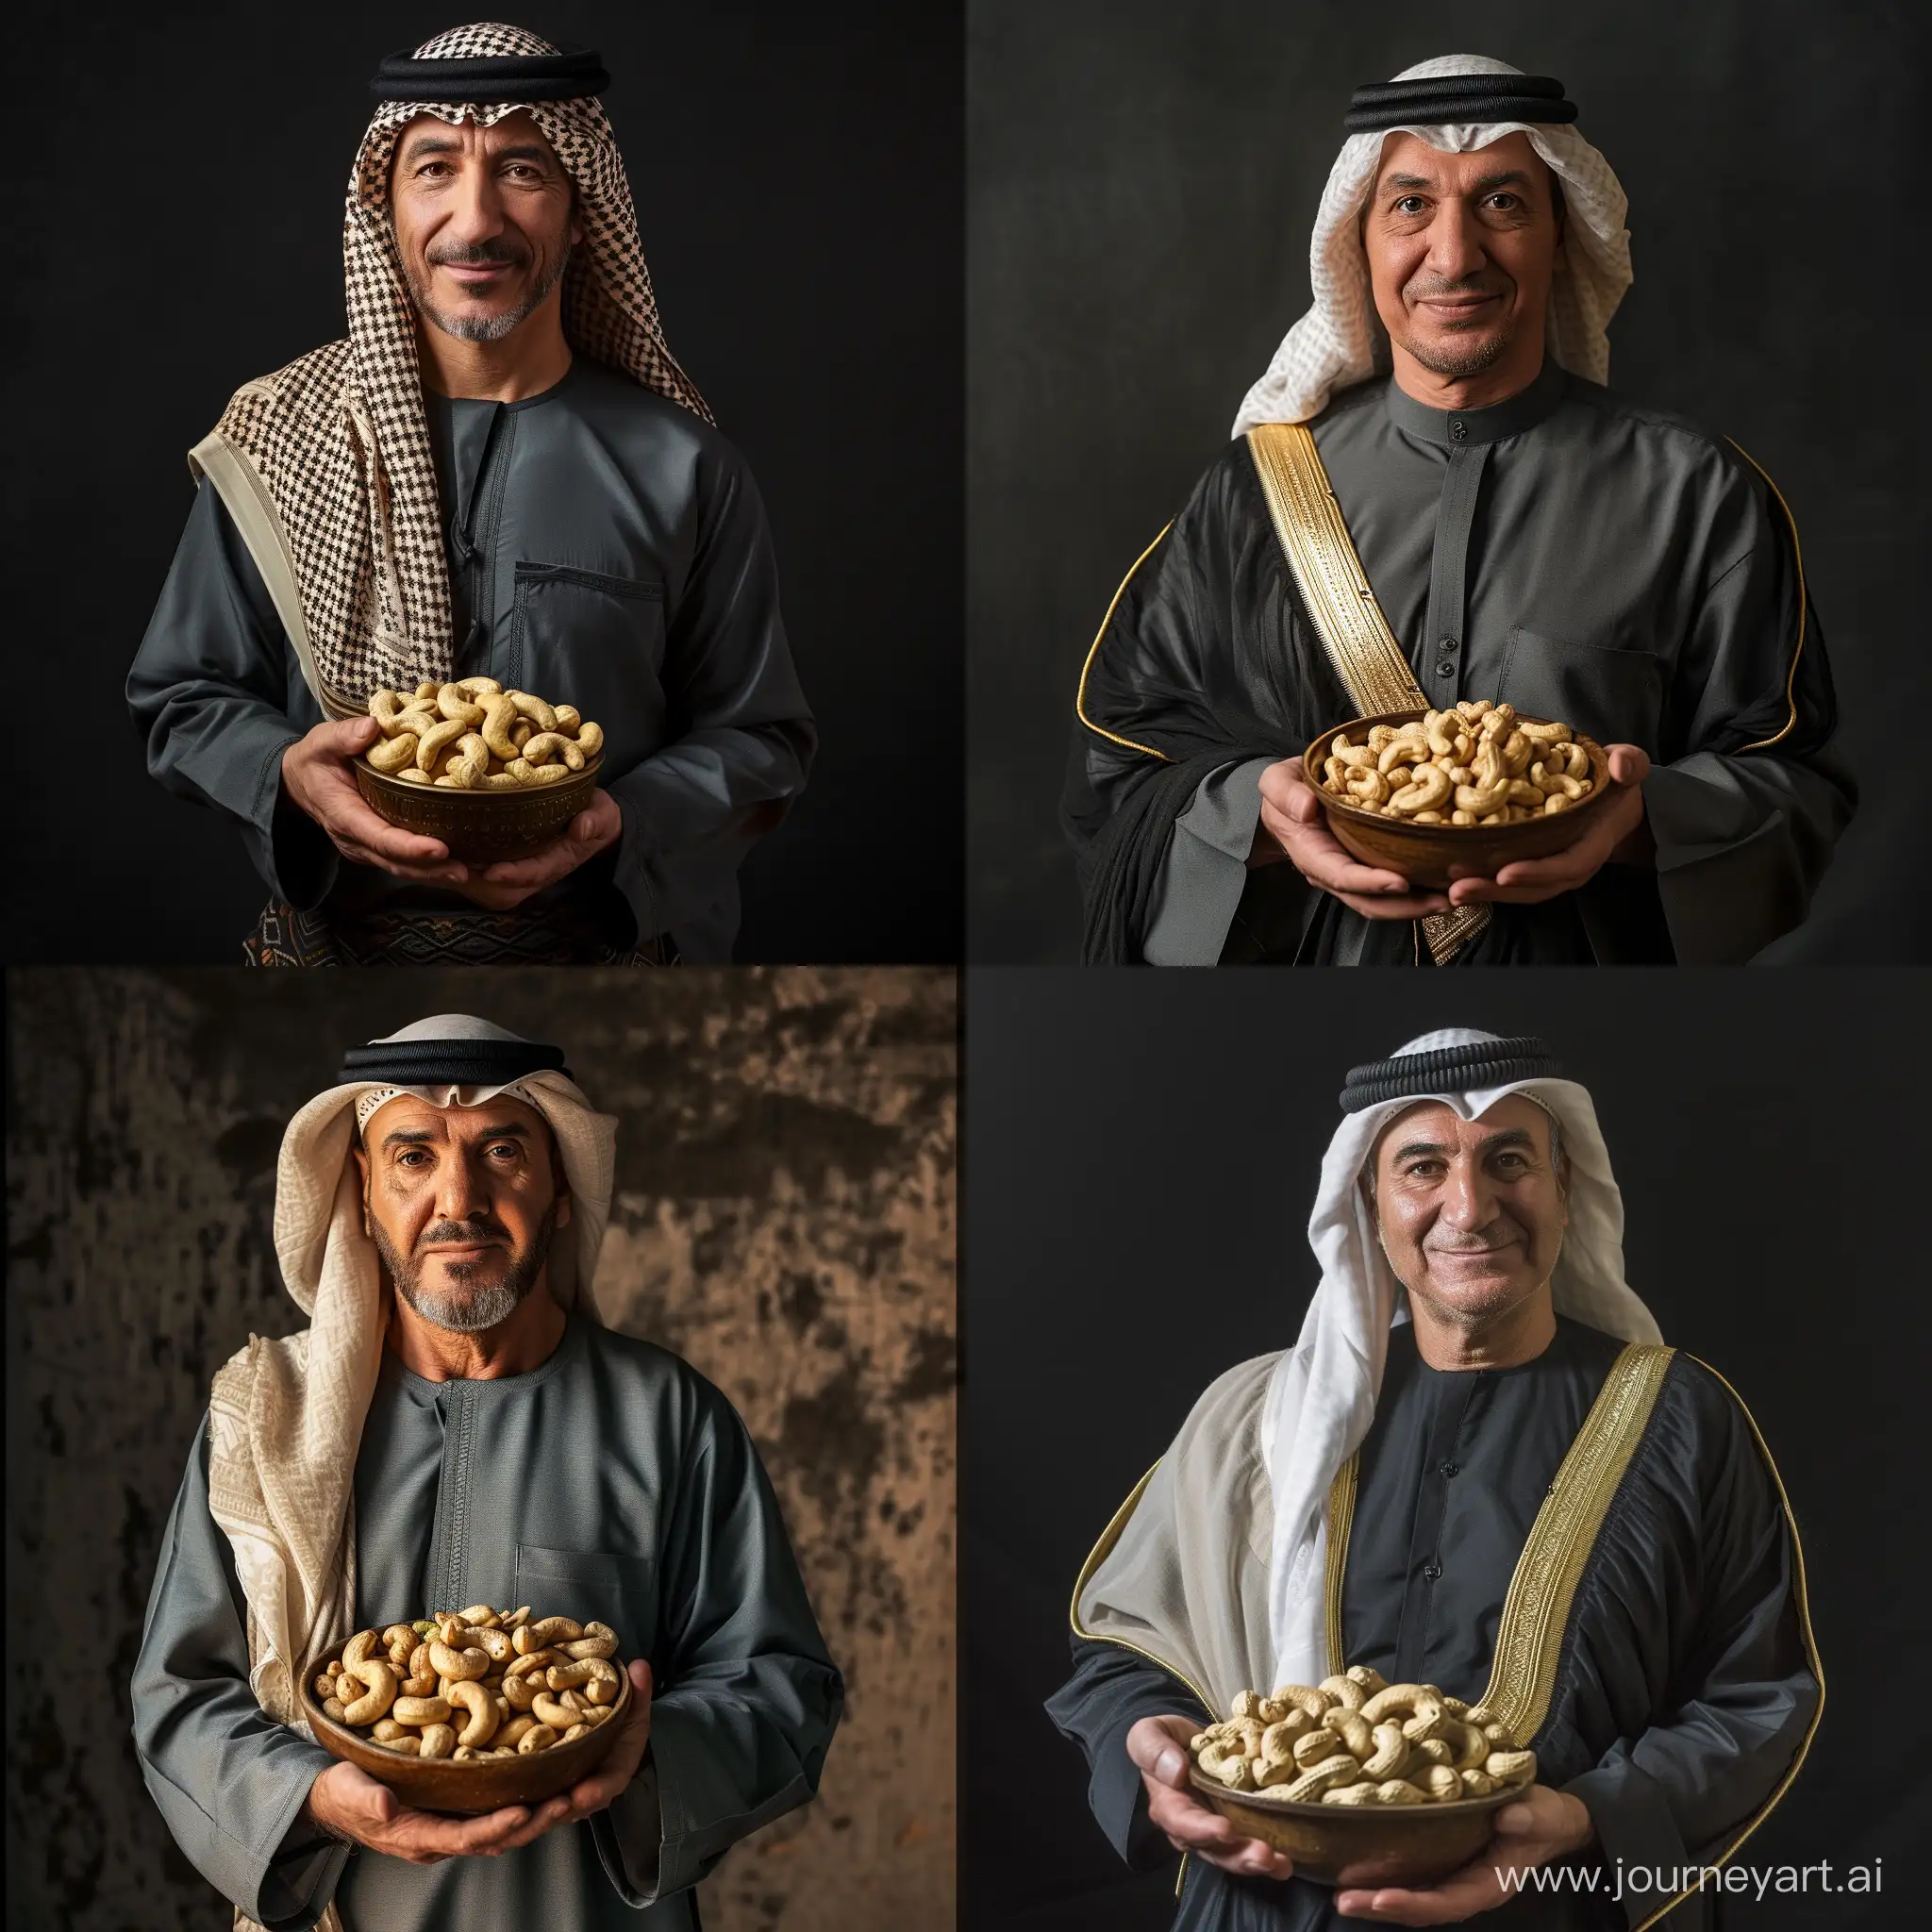 A real photo of a middle-aged man in Arabic dress holding a bowl of cashew nuts.